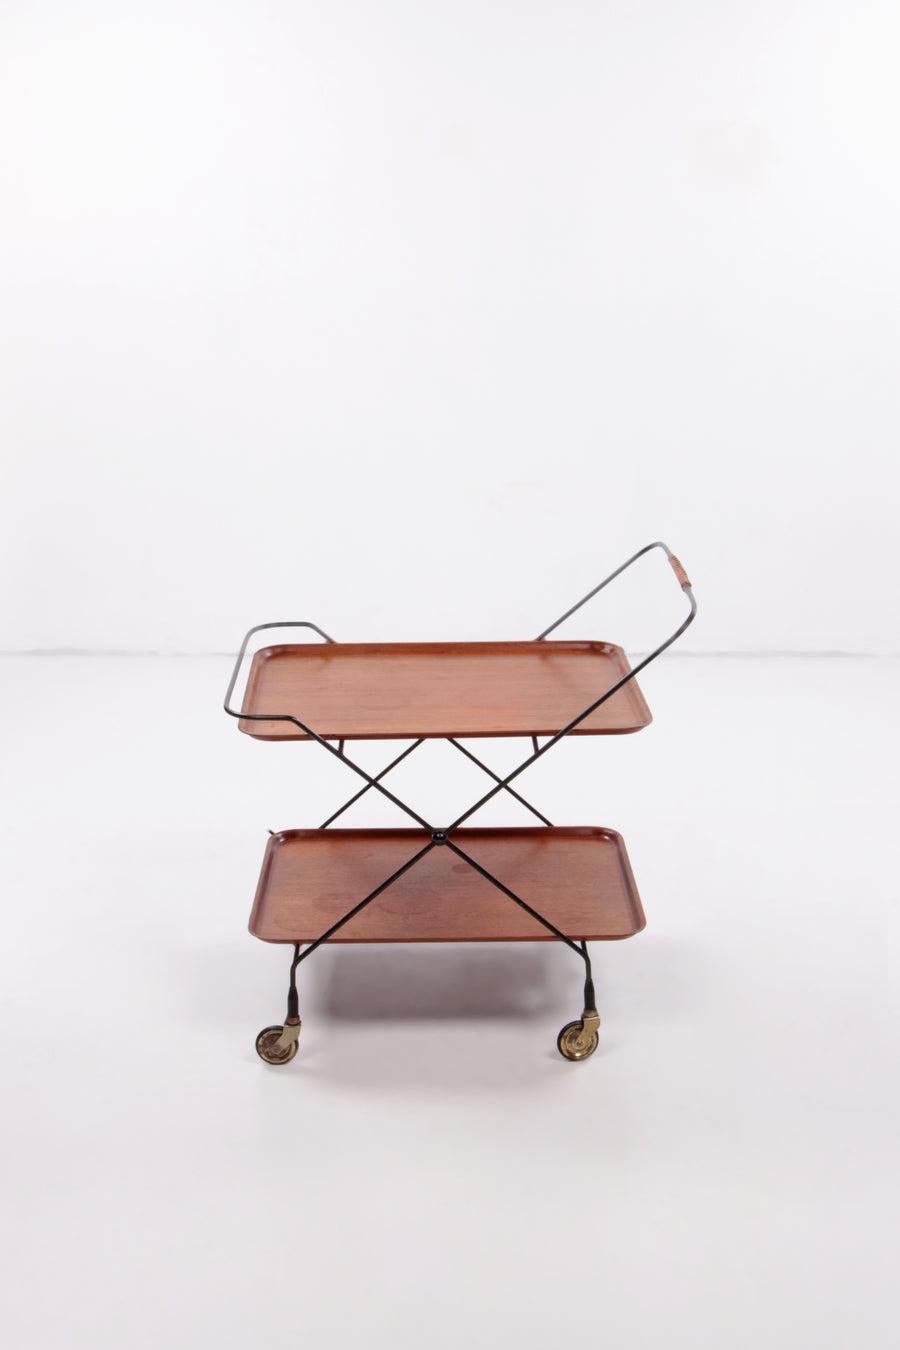 Paul Nail Vintage Trolley Made by Jie Gantofta,1960 Sweden

This stylish vintage serving trolley was designed in the 1960s by the Swedish designer Paul Nagel and produced by JIE Gantofta. The cart, which can also serve as a bar trolley, is made of